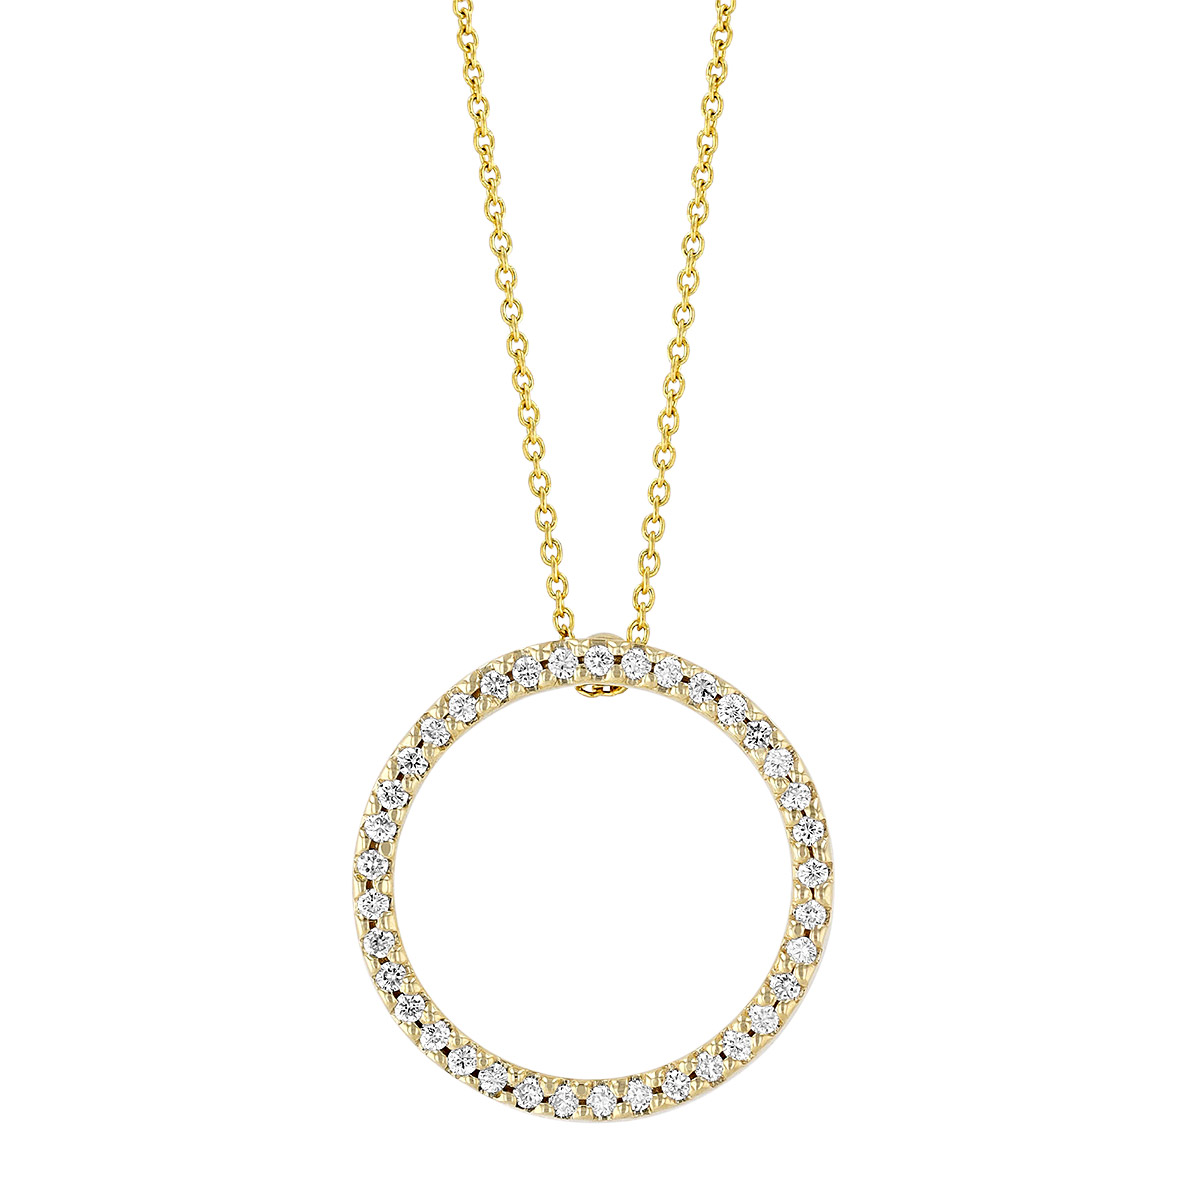 Roberto Coin Tiny Treasures Circle Pendant with Diamonds in Yellow Gold, 0.26 cttw